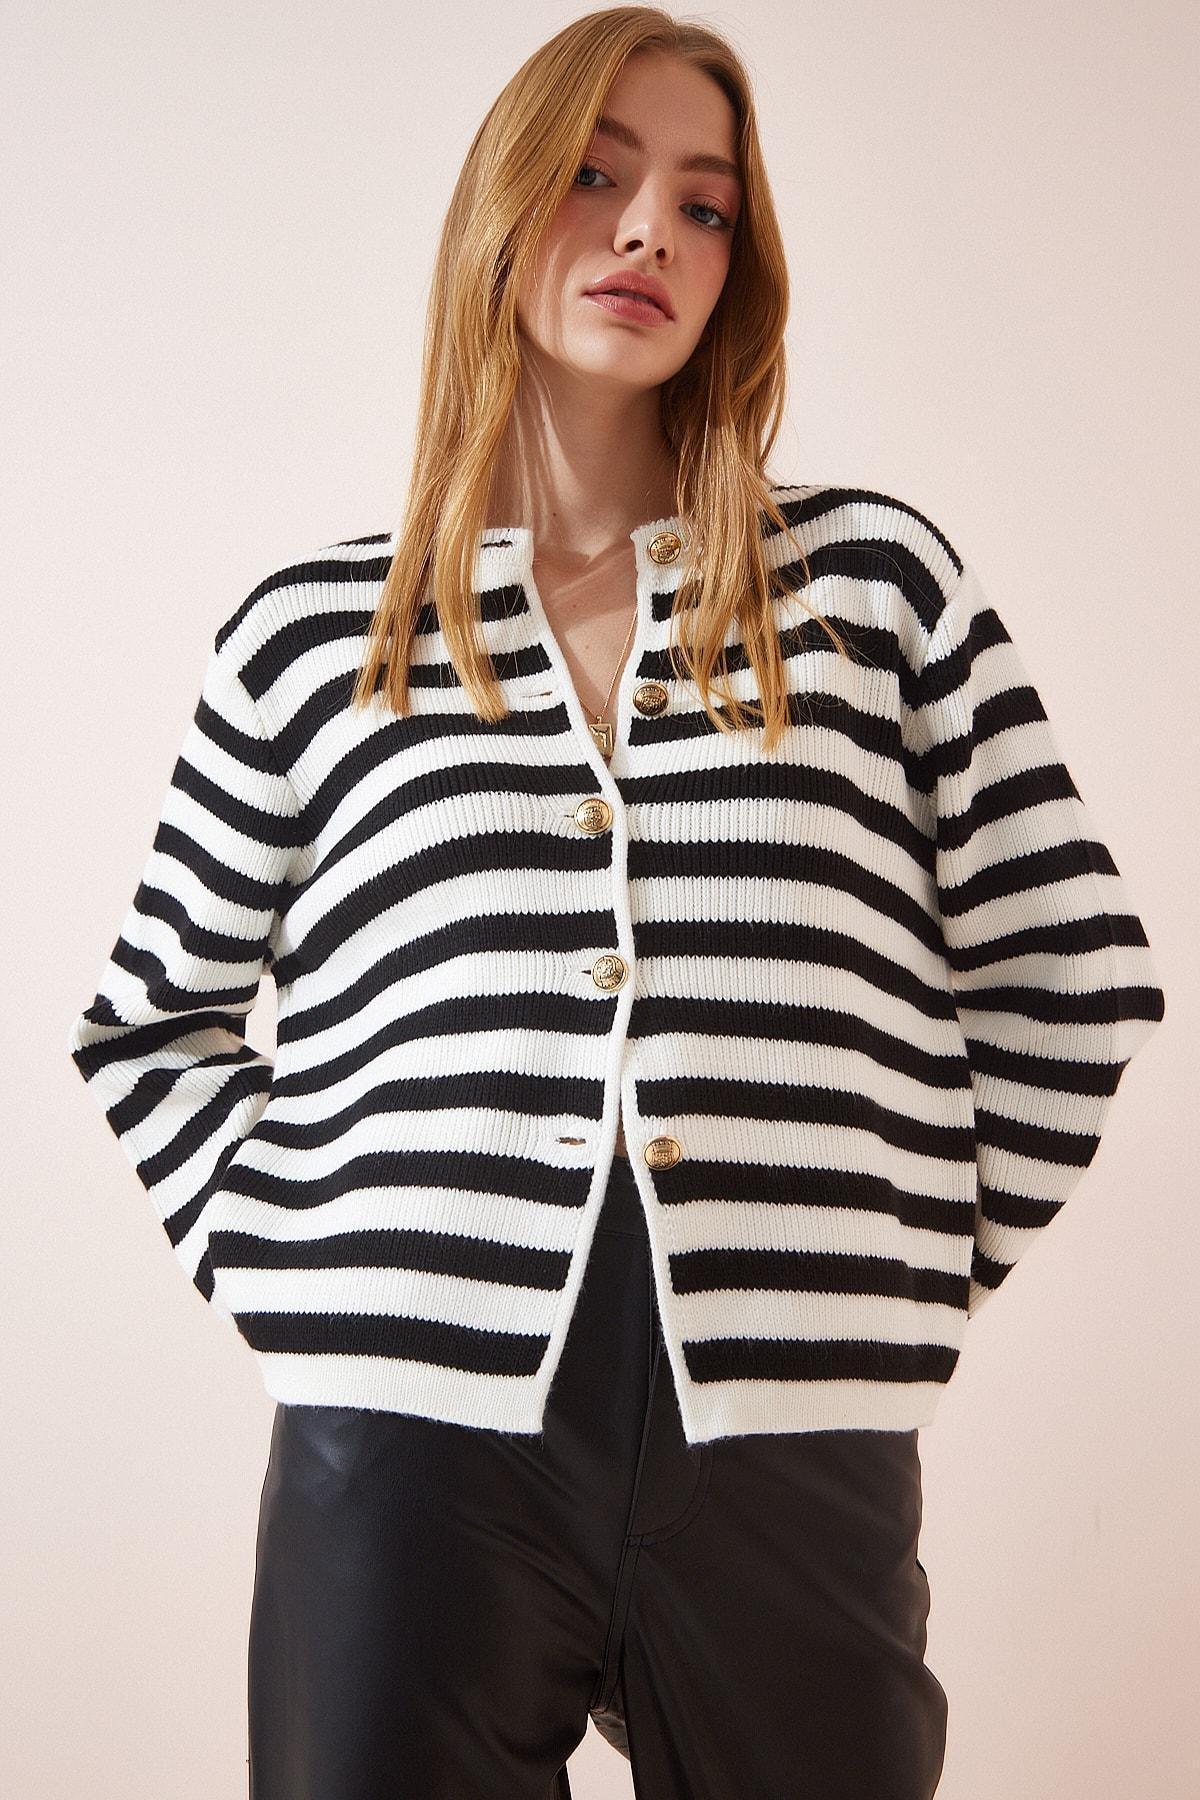 Happiness Istanbul - White Striped Knitwear Cardigan